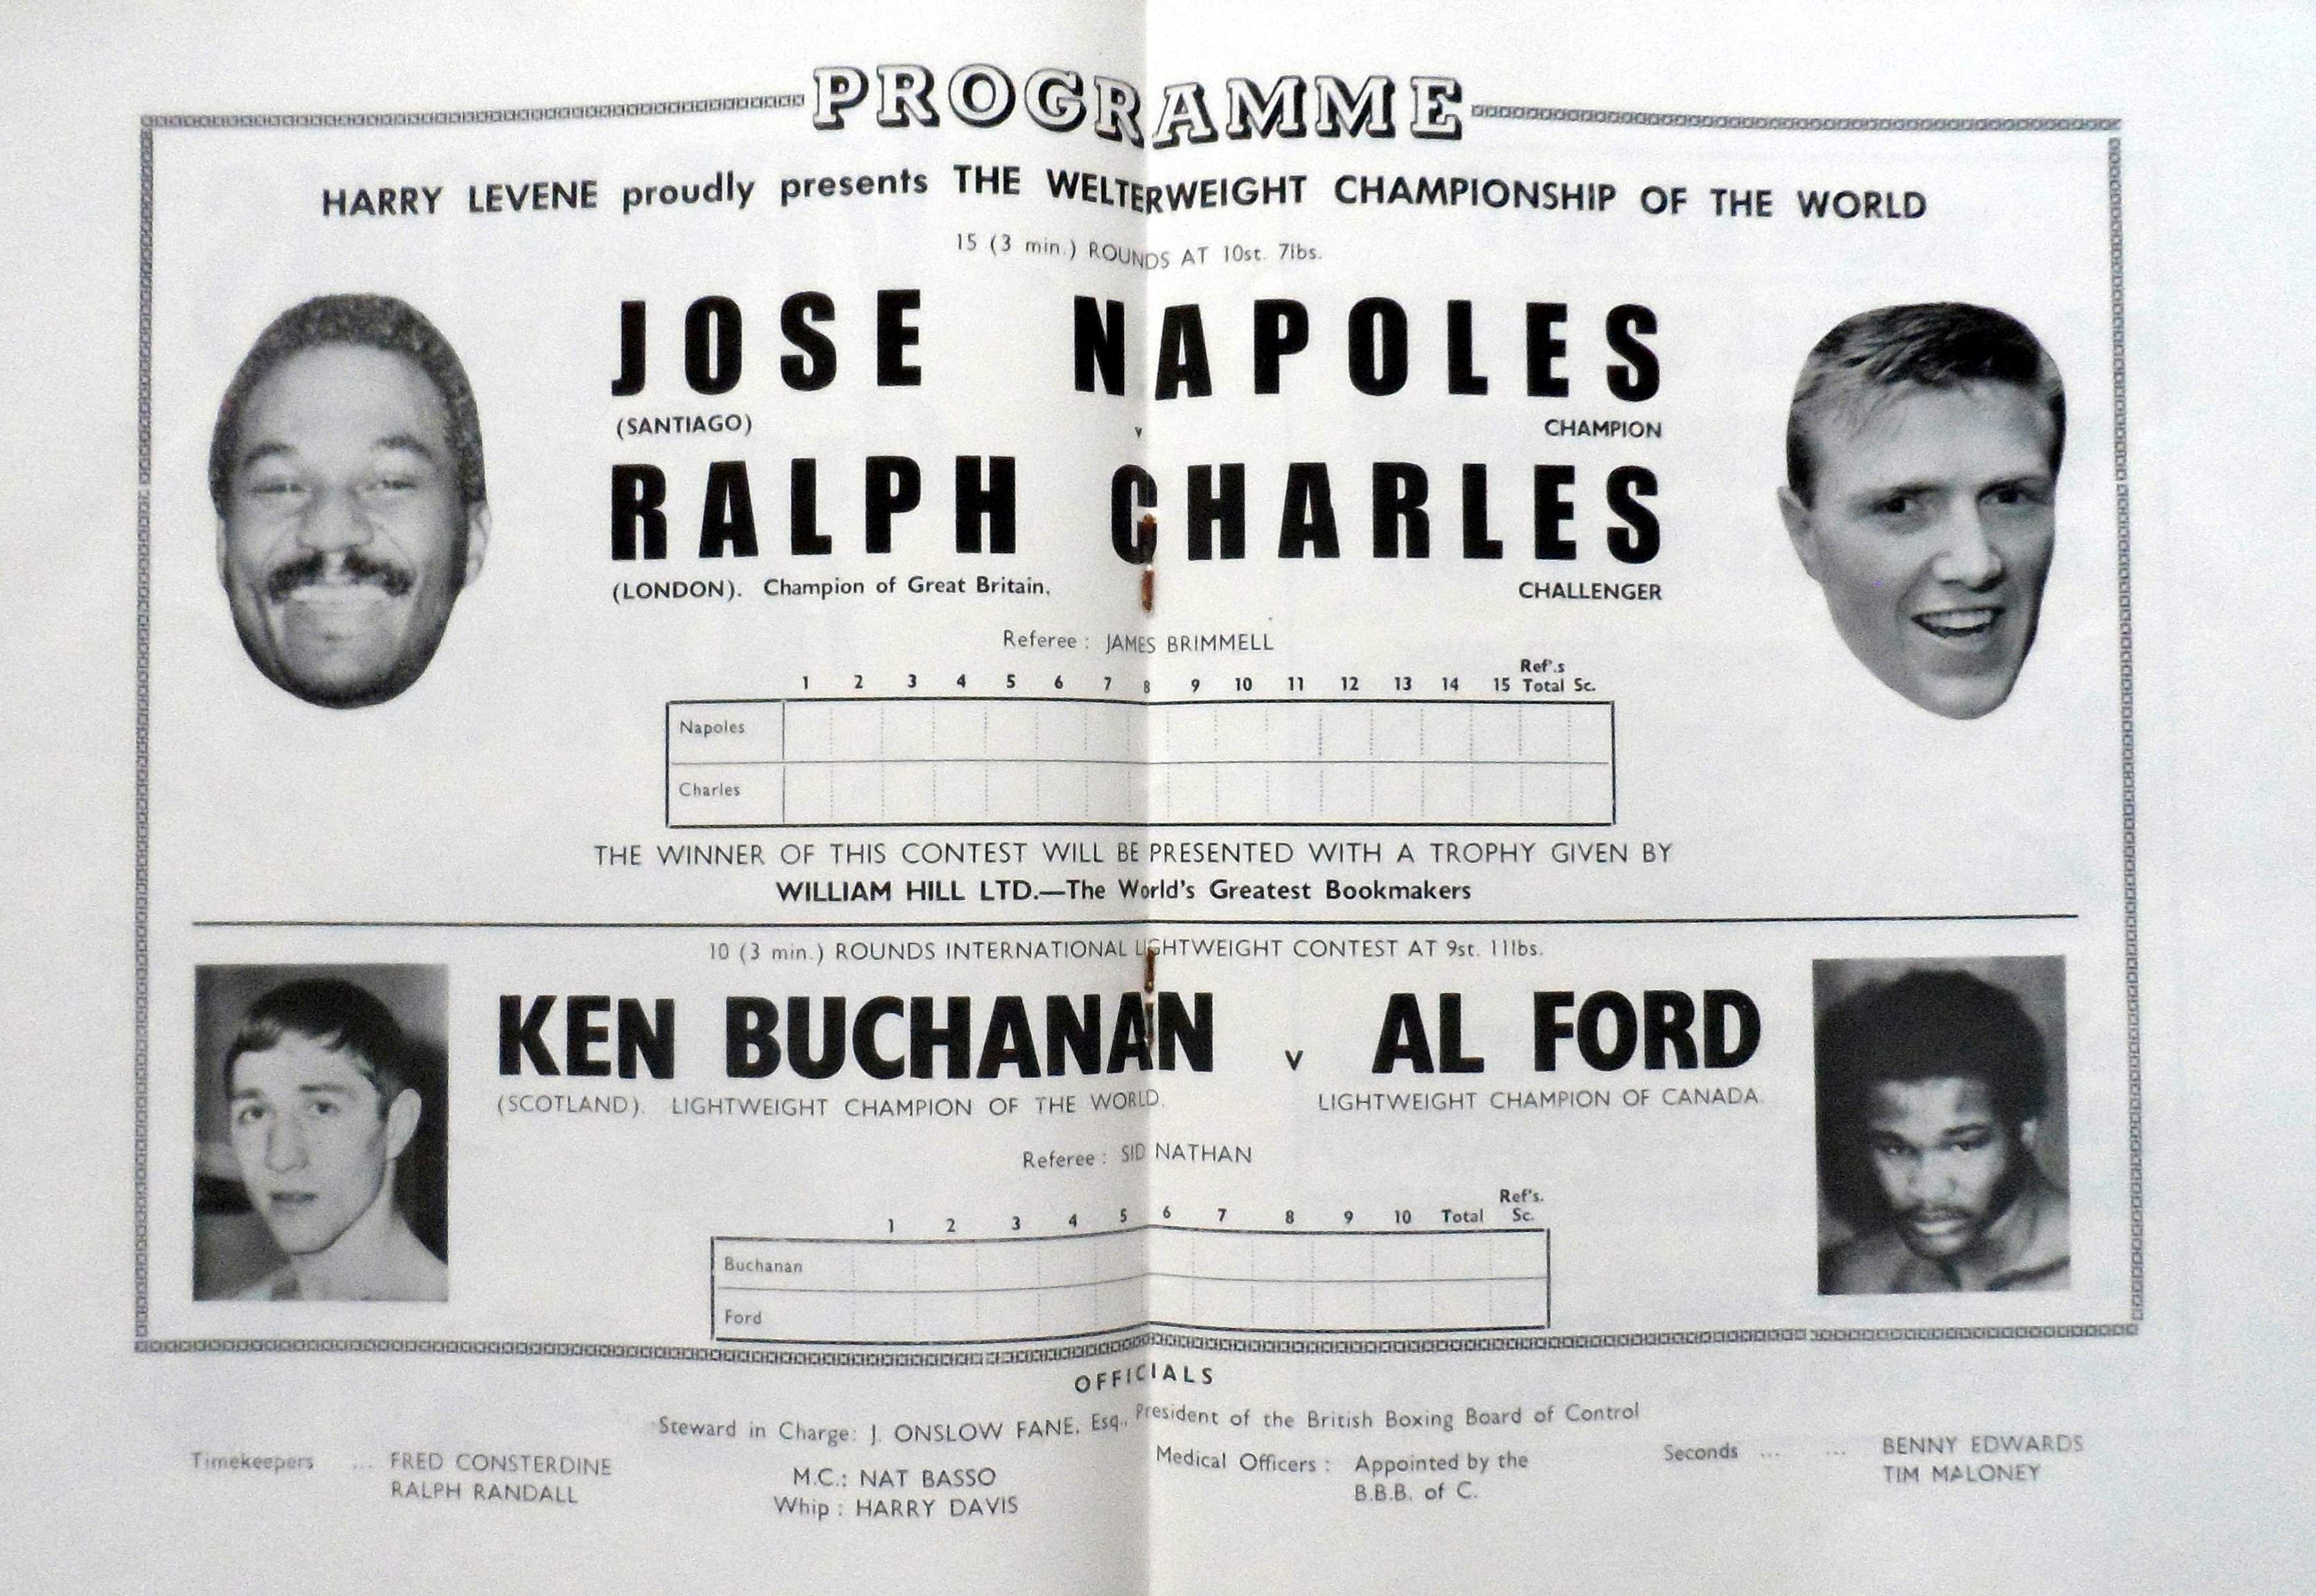 Fight Program Score Card - Napoles-Charles and Buchanan-Ford 1972.